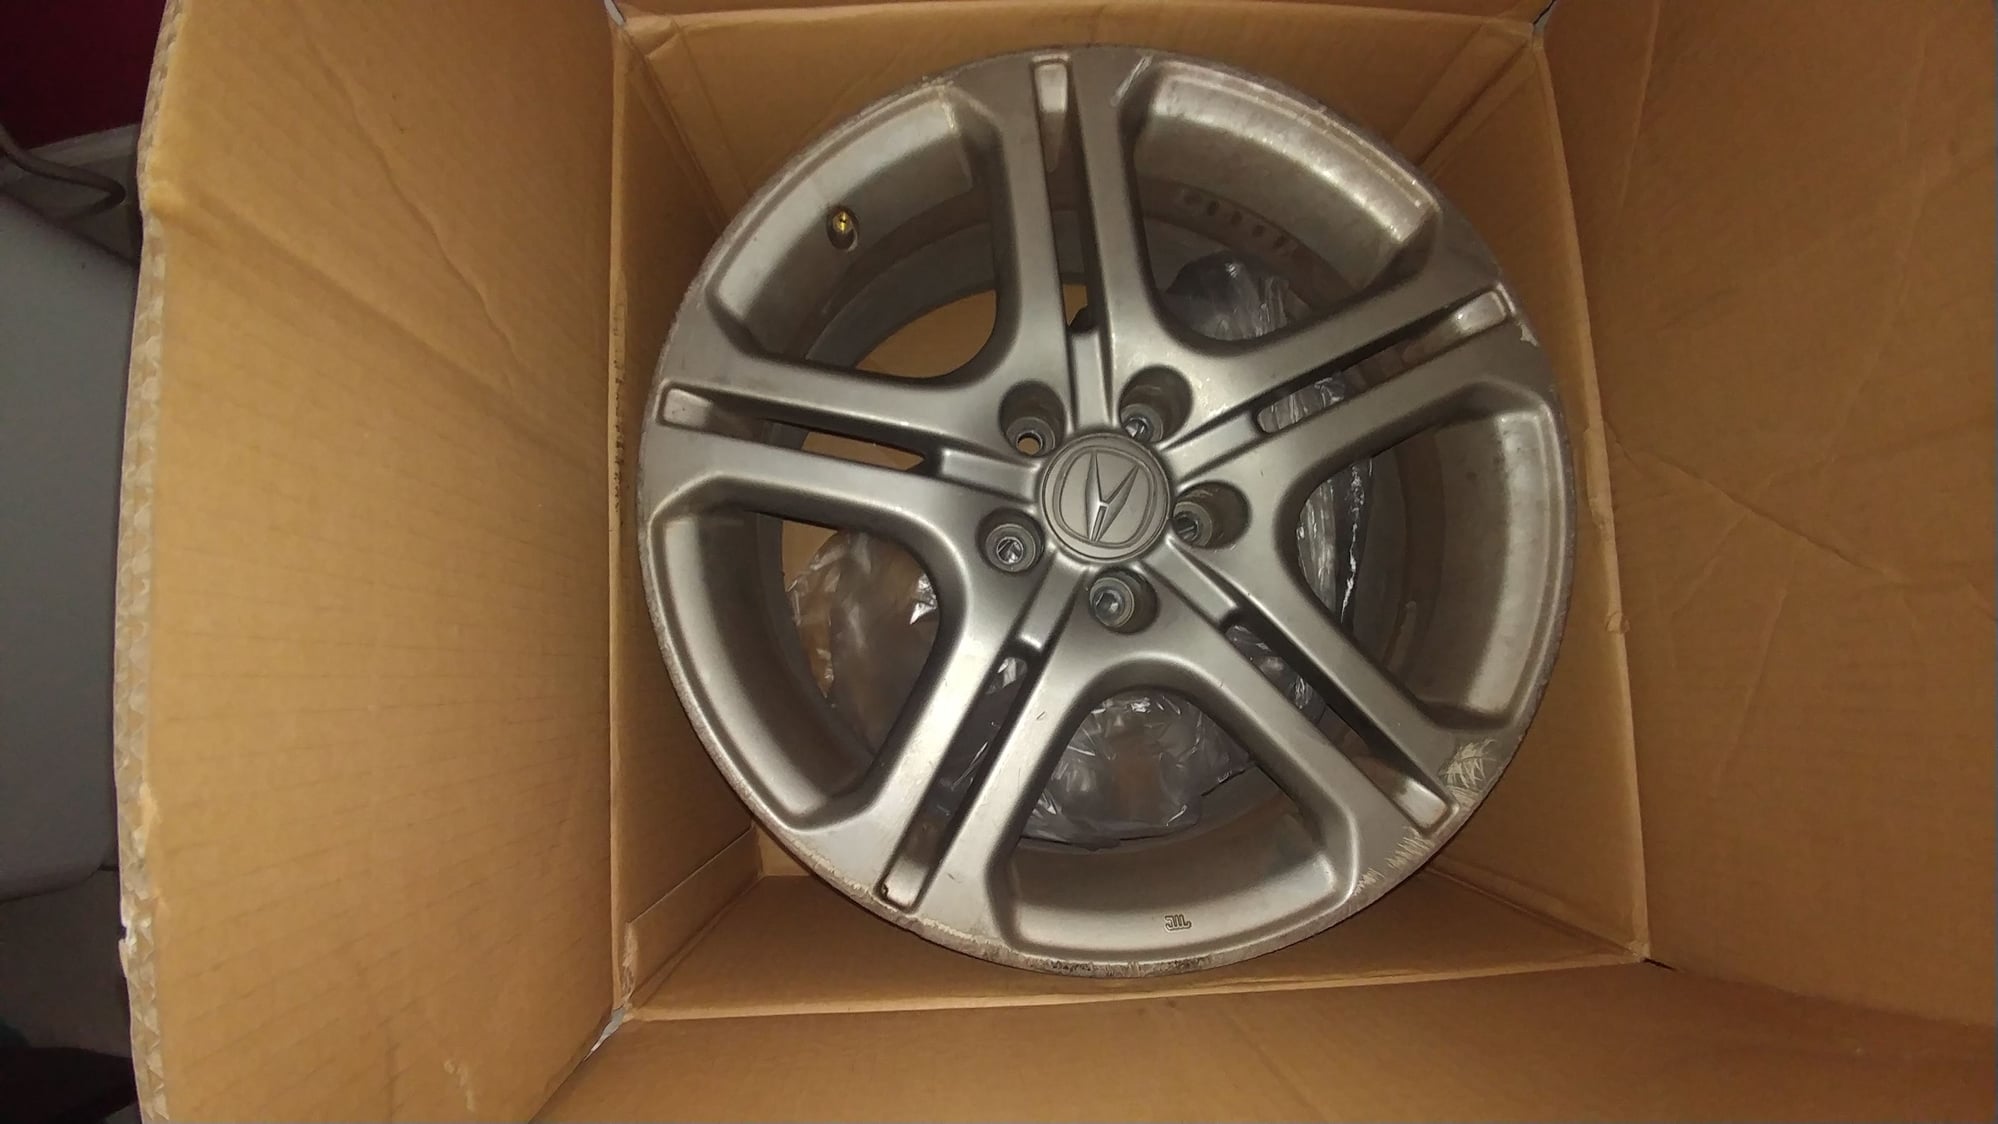 2008 Acura TL - 18x8.5 A-Spec Wheels - Wheels and Tires/Axles - $300 - Houston, TX 77053, United States